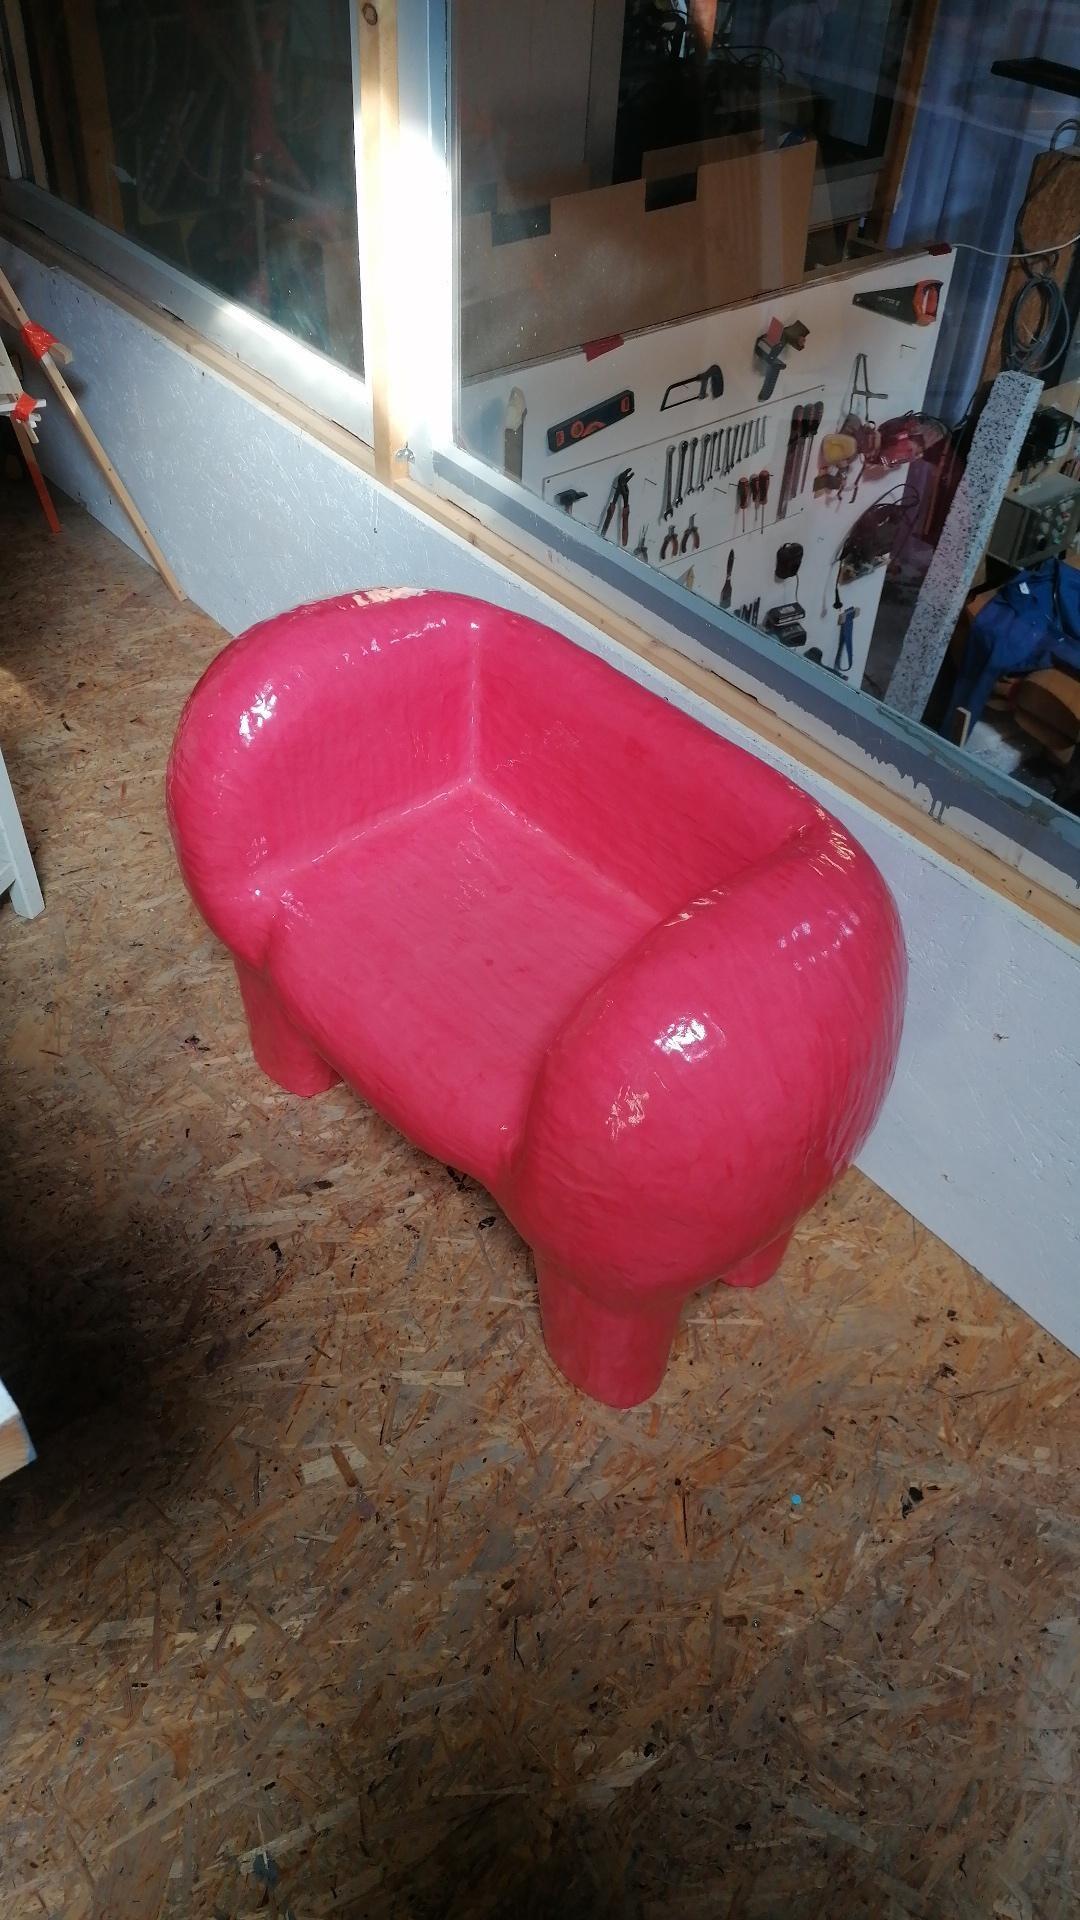 Contemporary Hippo Chair Made in 2154 Minutes by Diego Faivre Minute Manufacture Design For Sale